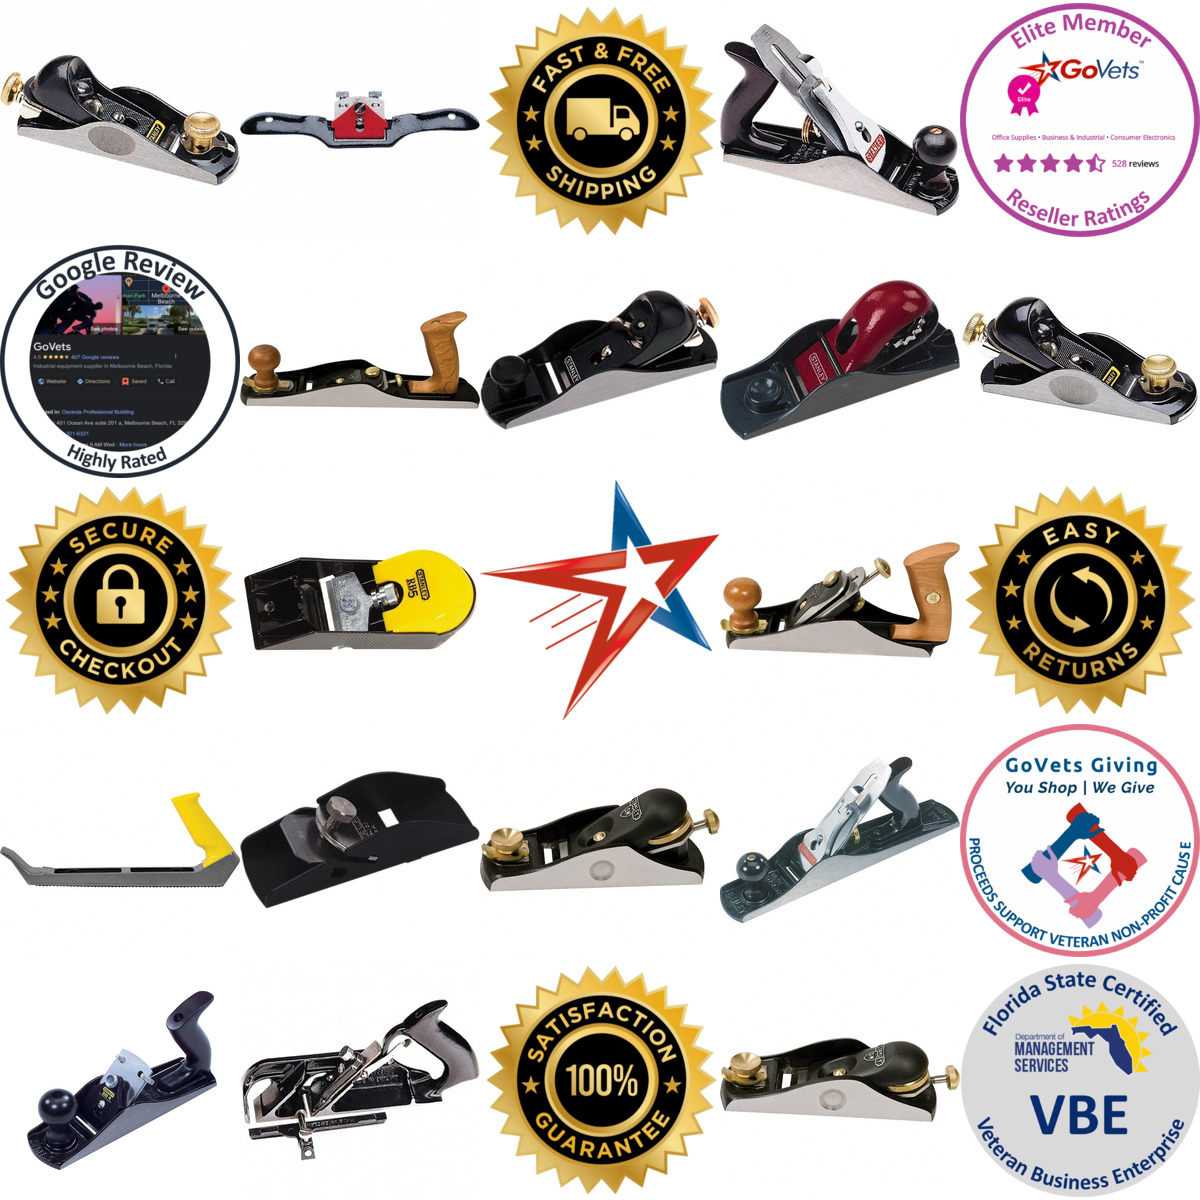 A selection of Stanley products on GoVets